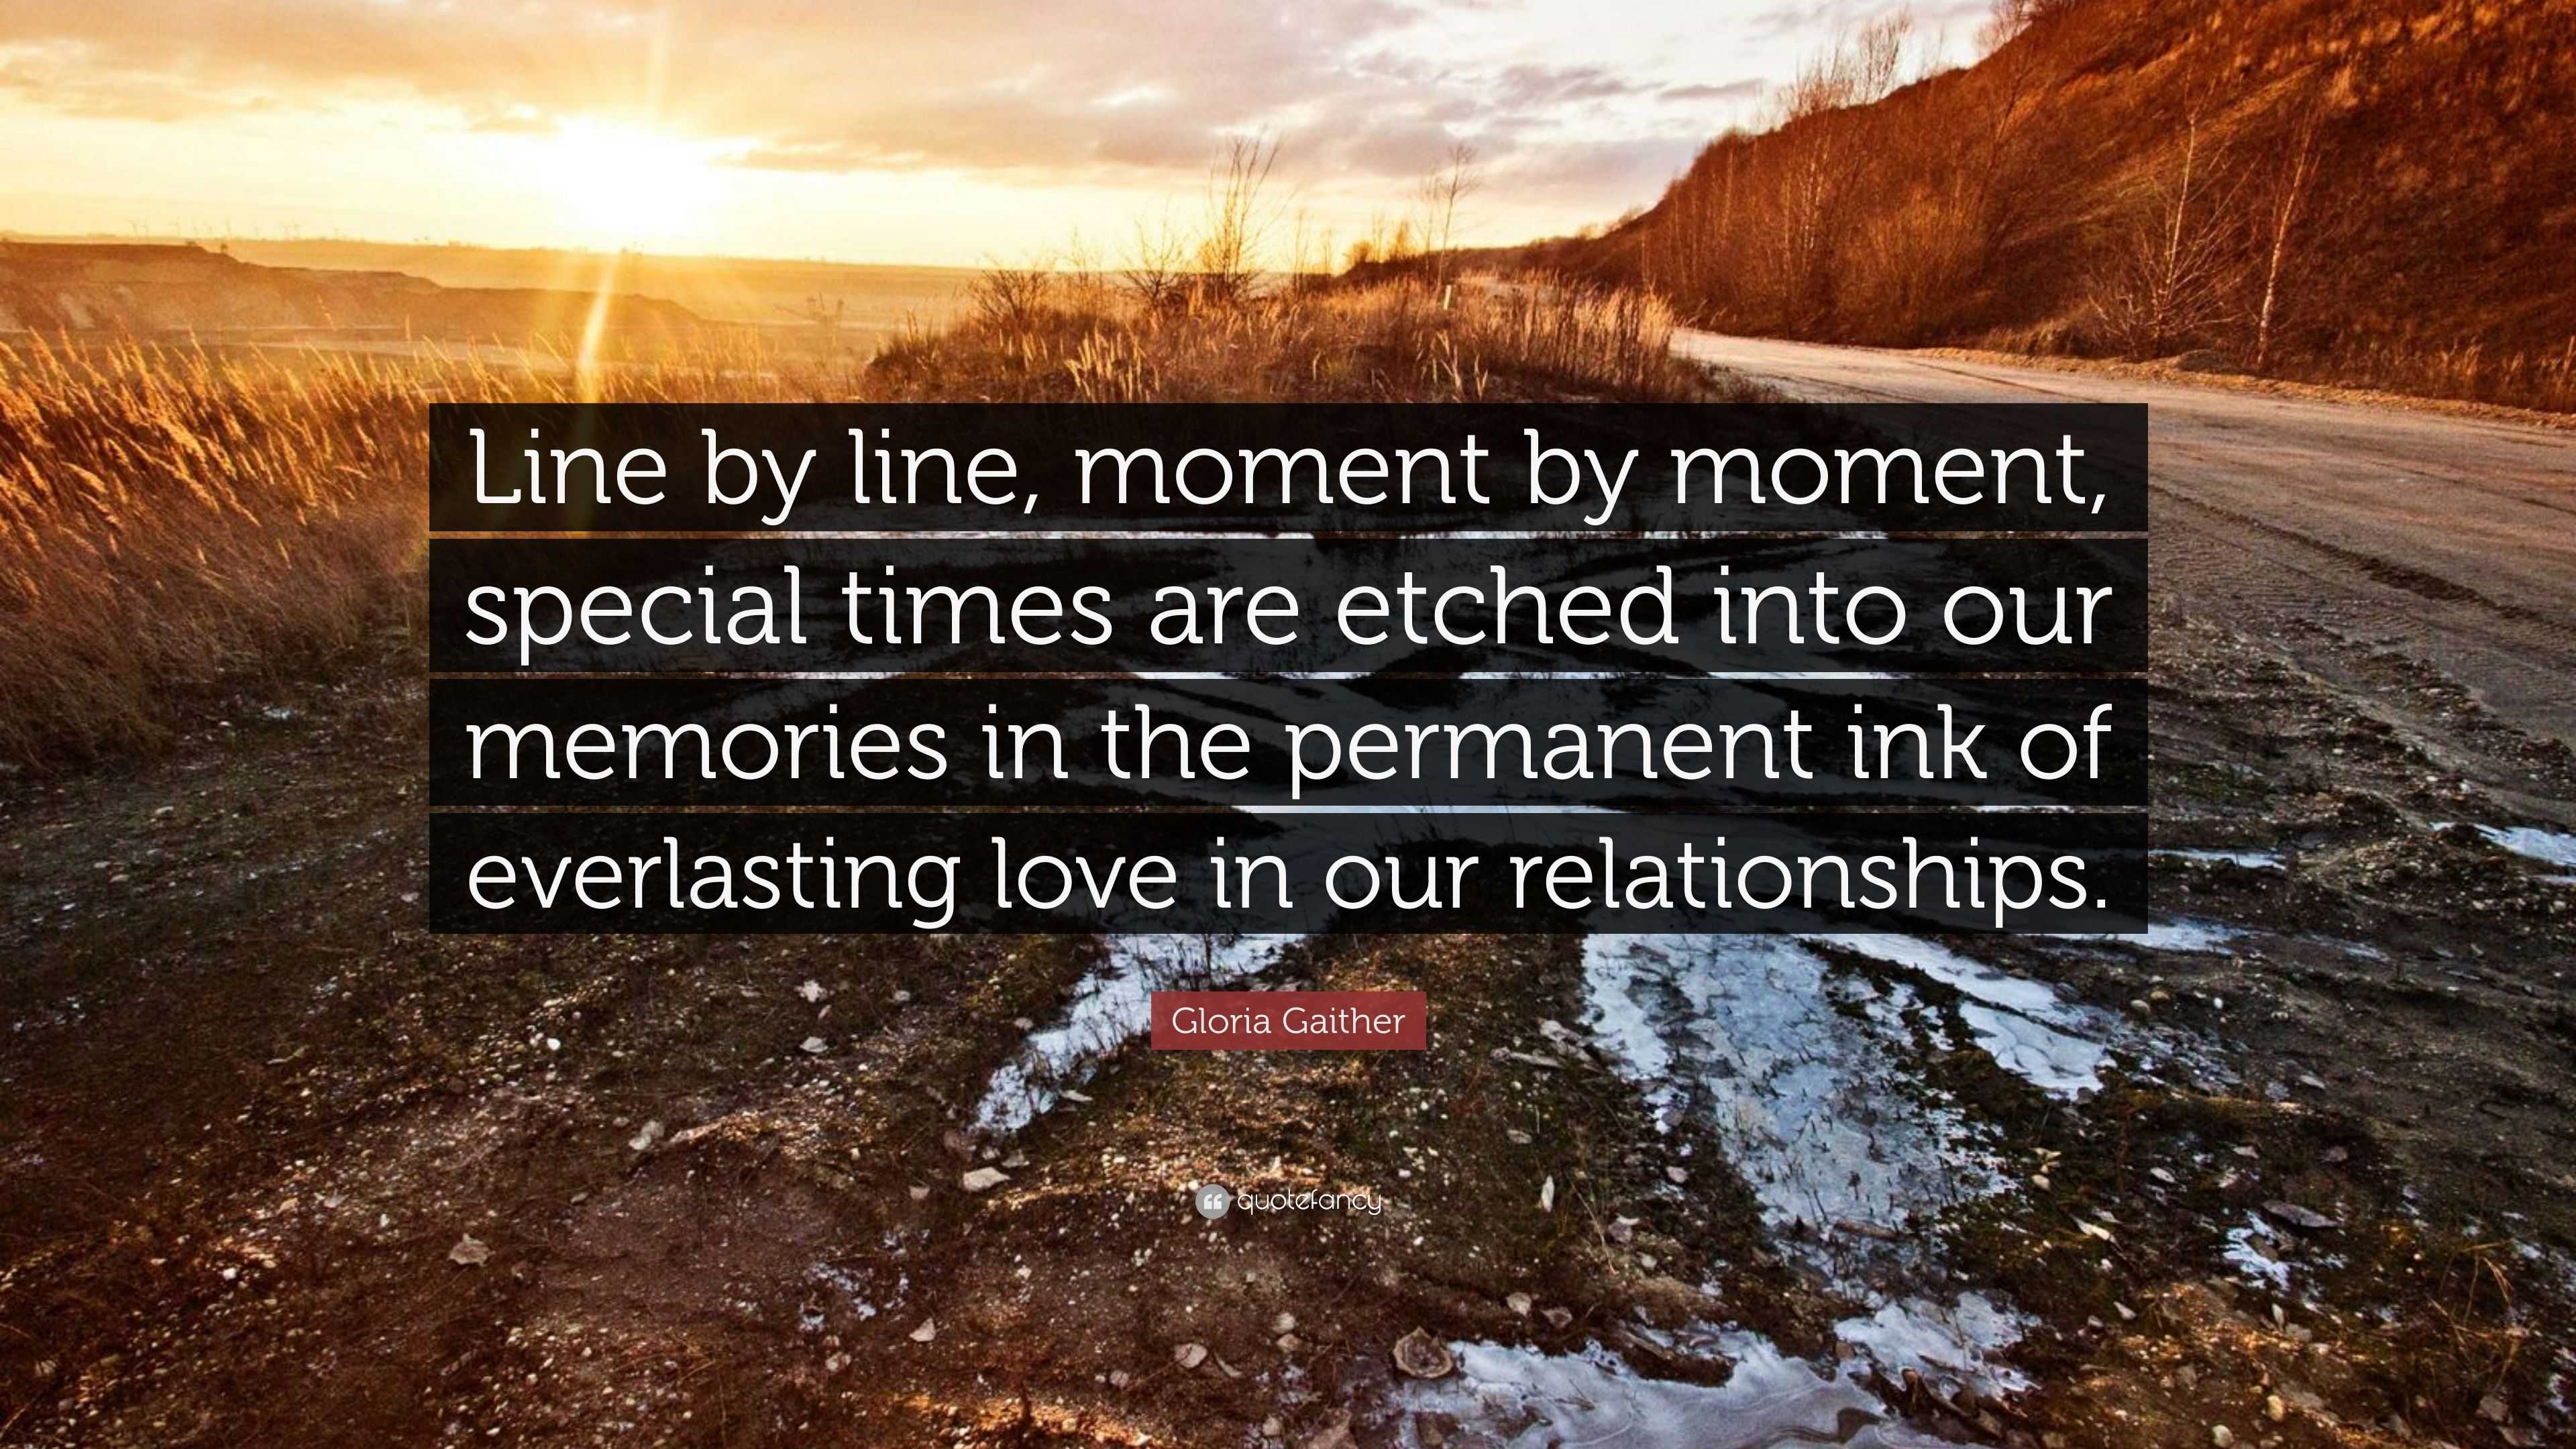 Romantic Moment of the Week: The Other End of the Line